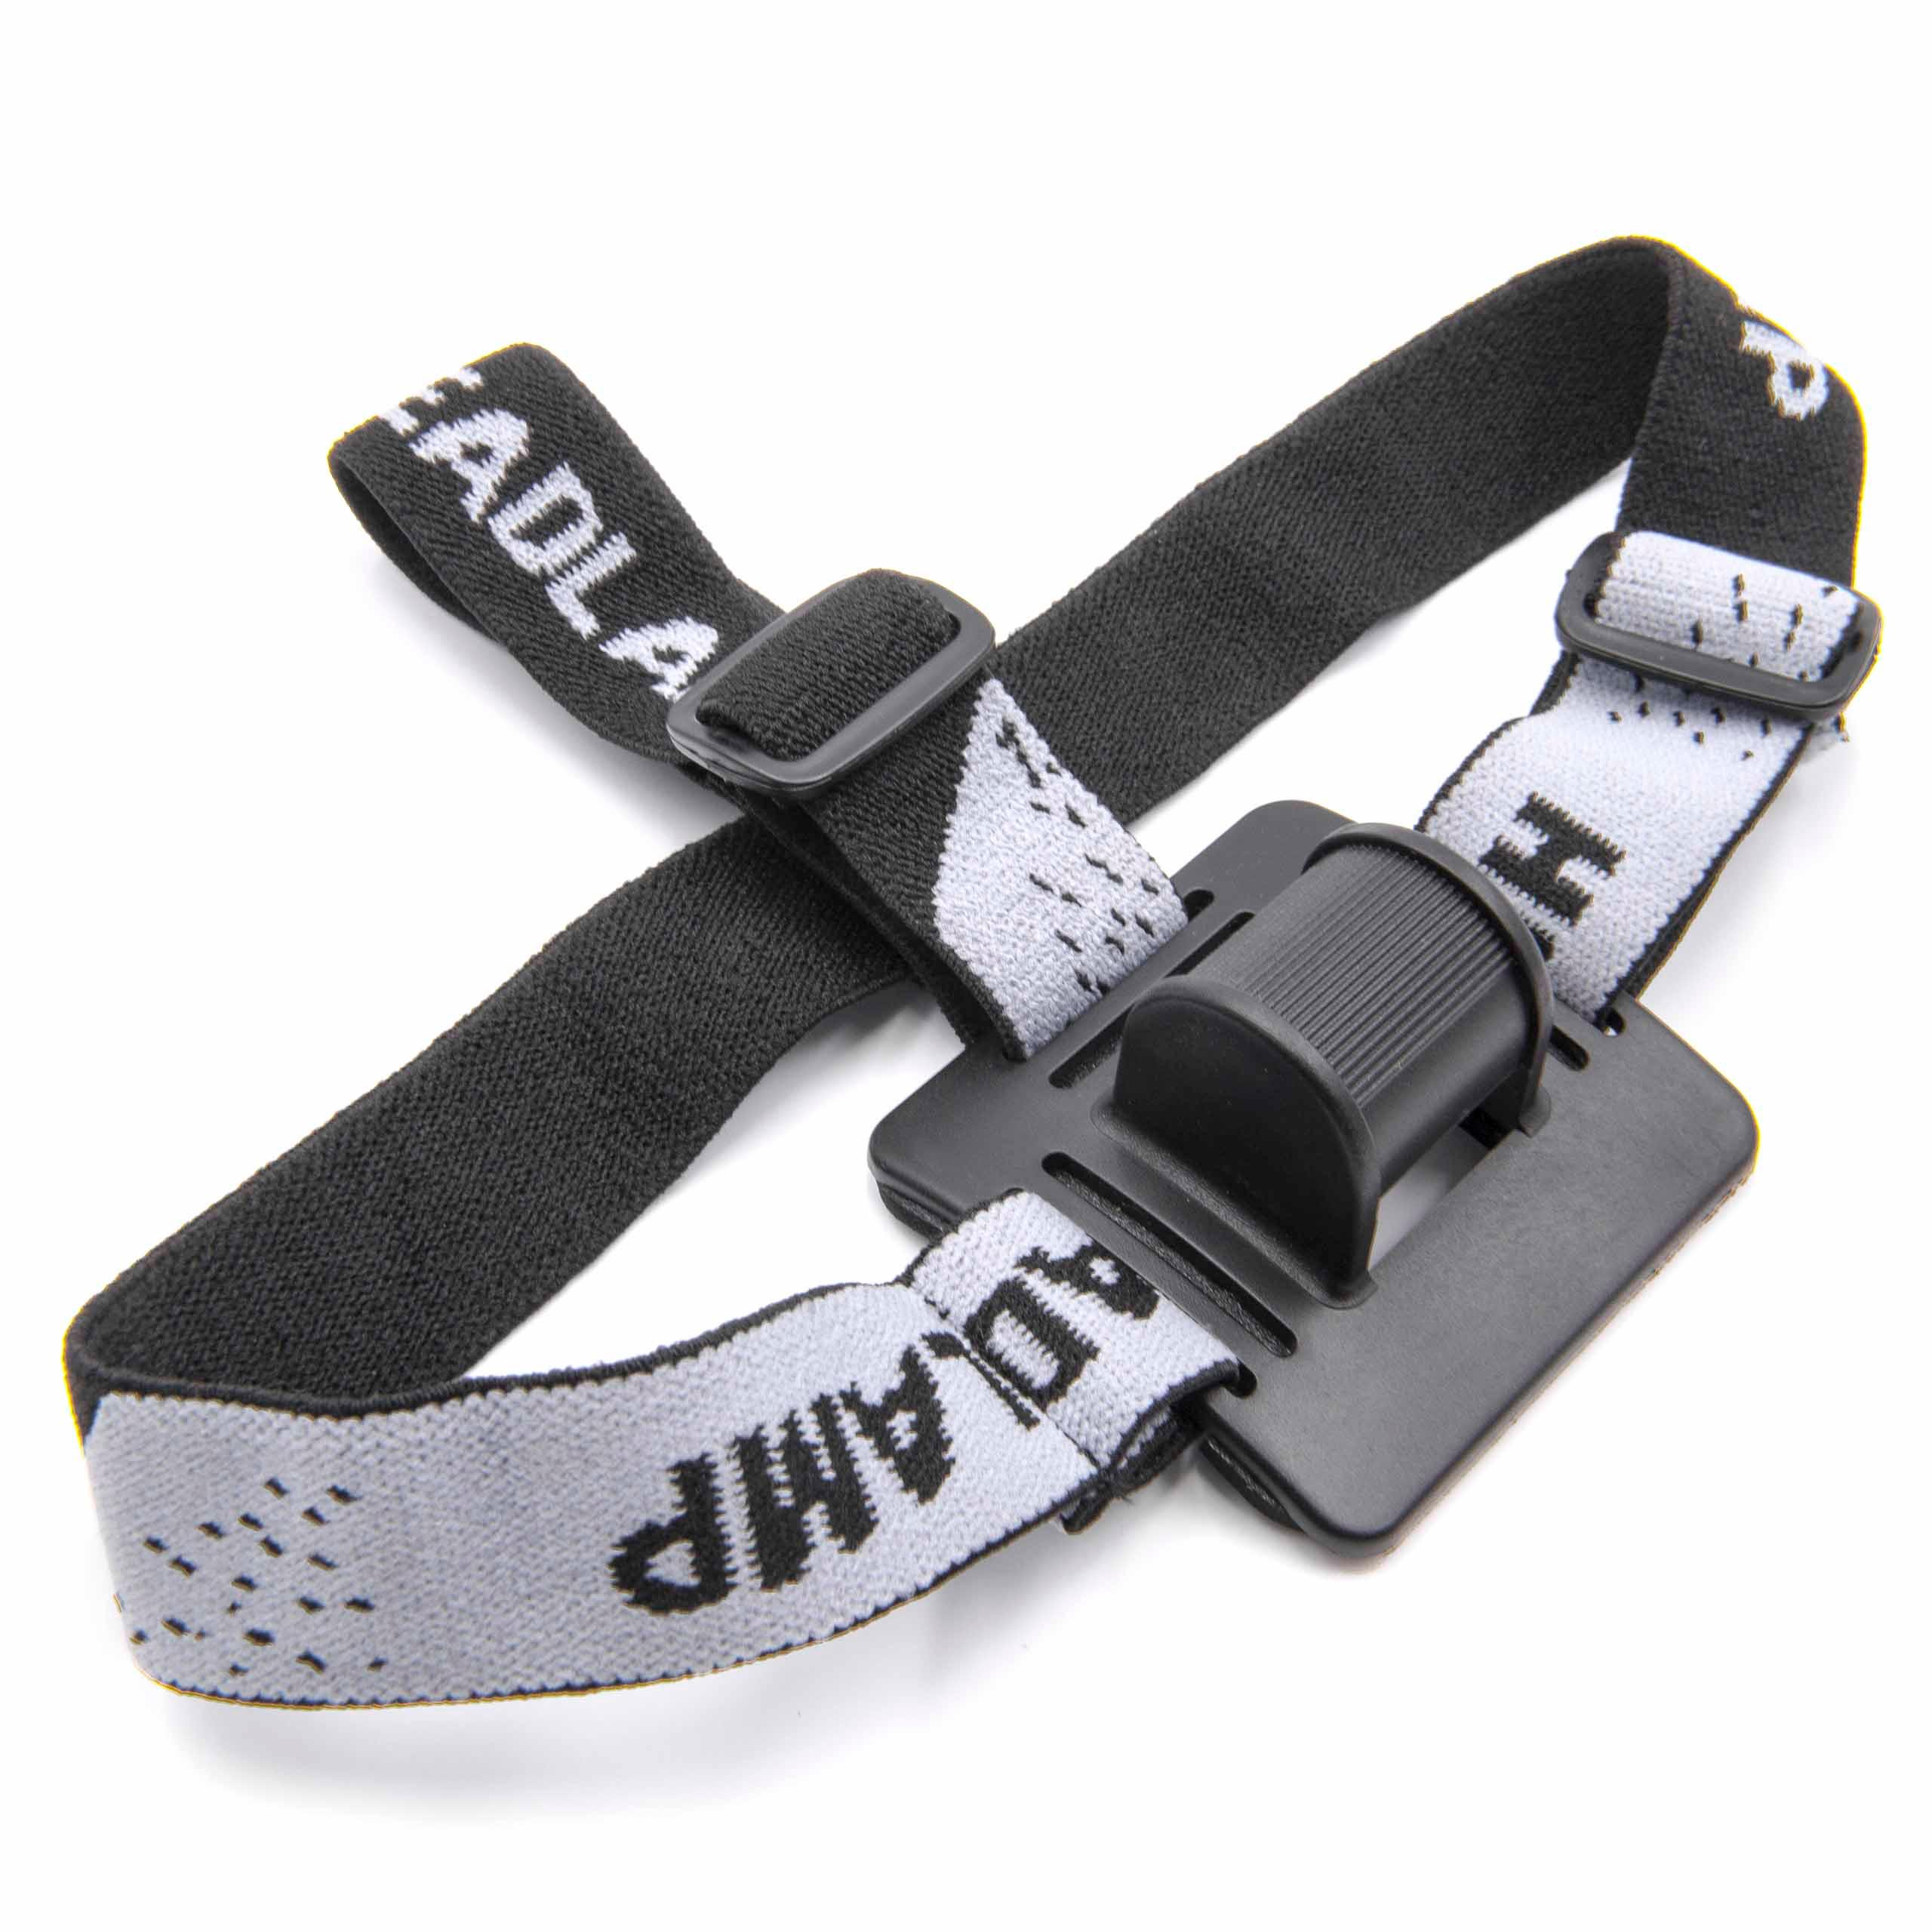 vhbw Helmet Strap for Various Bicycles Lamps, Battery-Powered Bike Lights e.g. compatible with CREE XMLT6 LED,